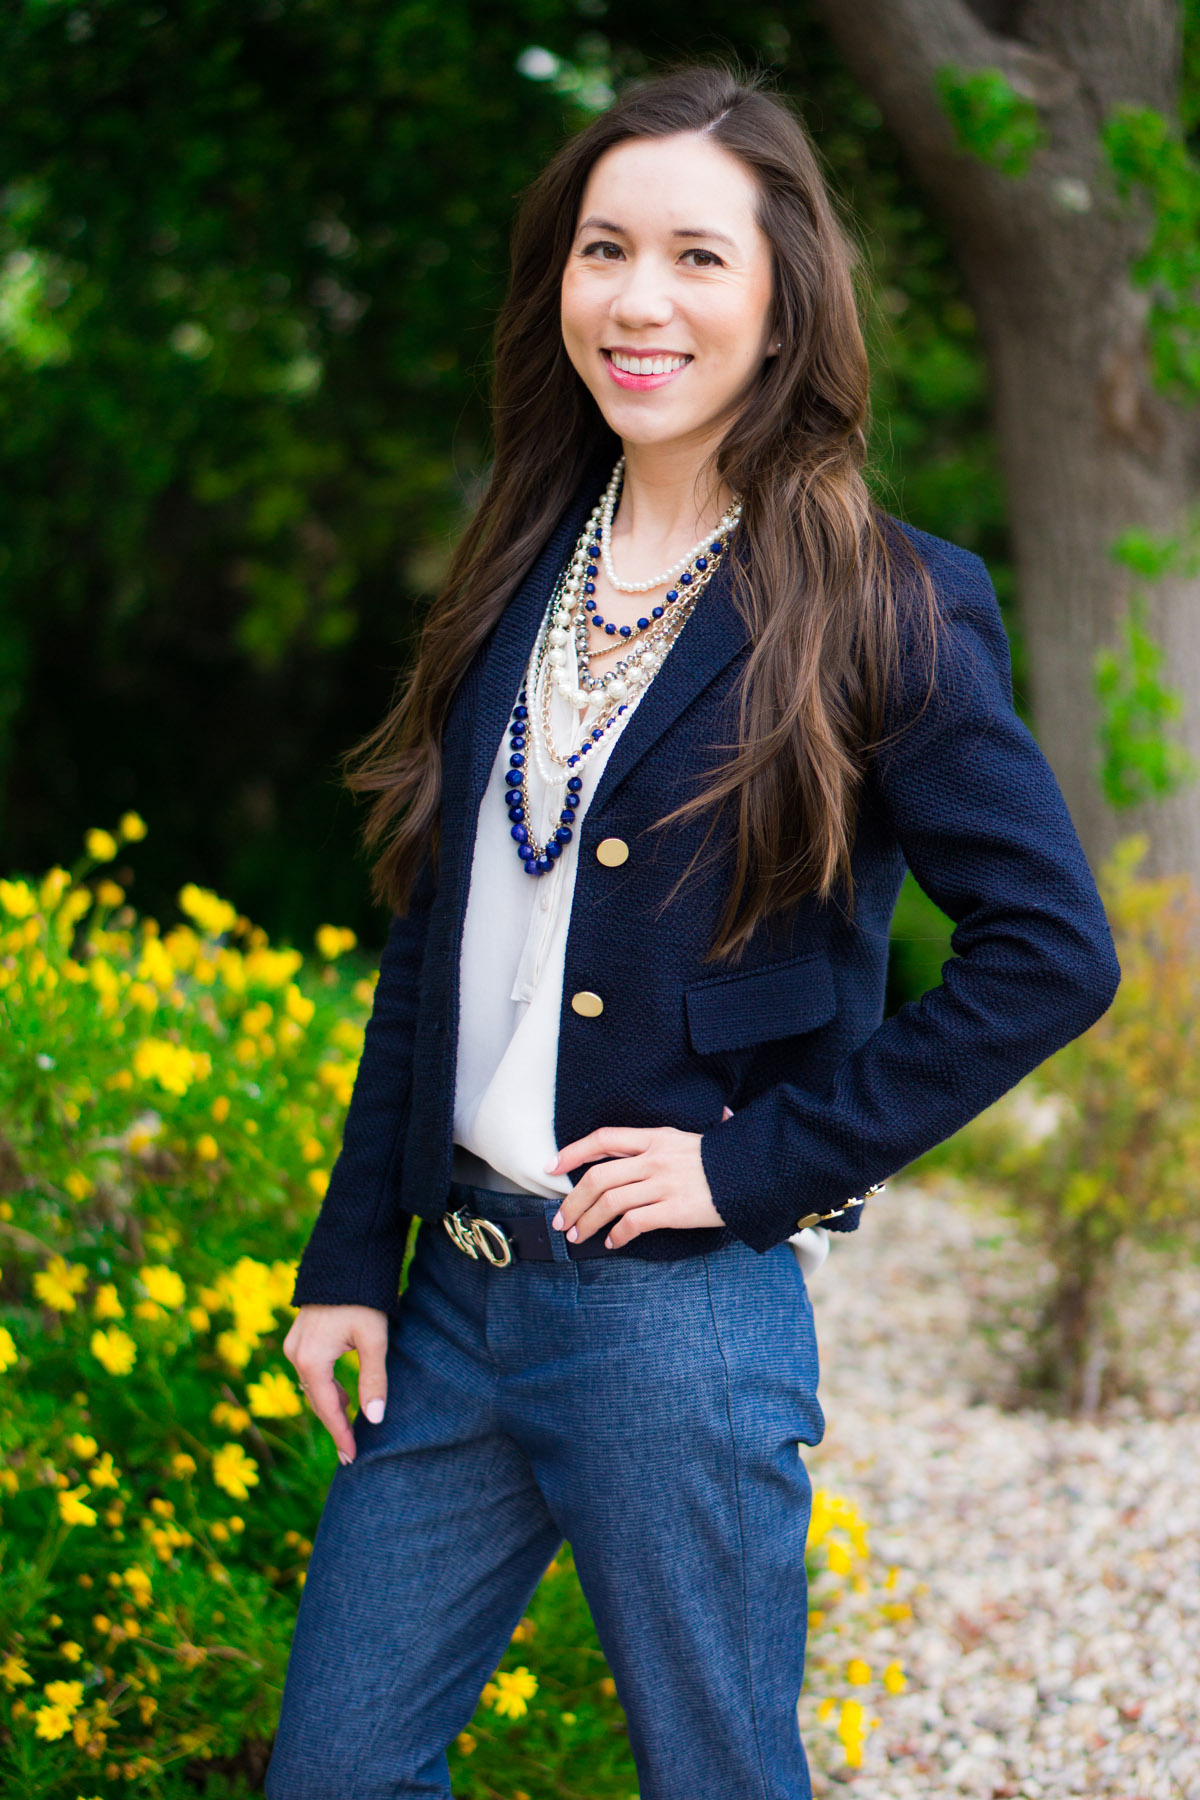 Ann Taylor Pearlized necklace & blazer | Banana Republic Sloan Slim ankle pants | Blue work outfit ideas inspiration | spring corporate attire ideas | Talbots belt | Cole Haan bow heels